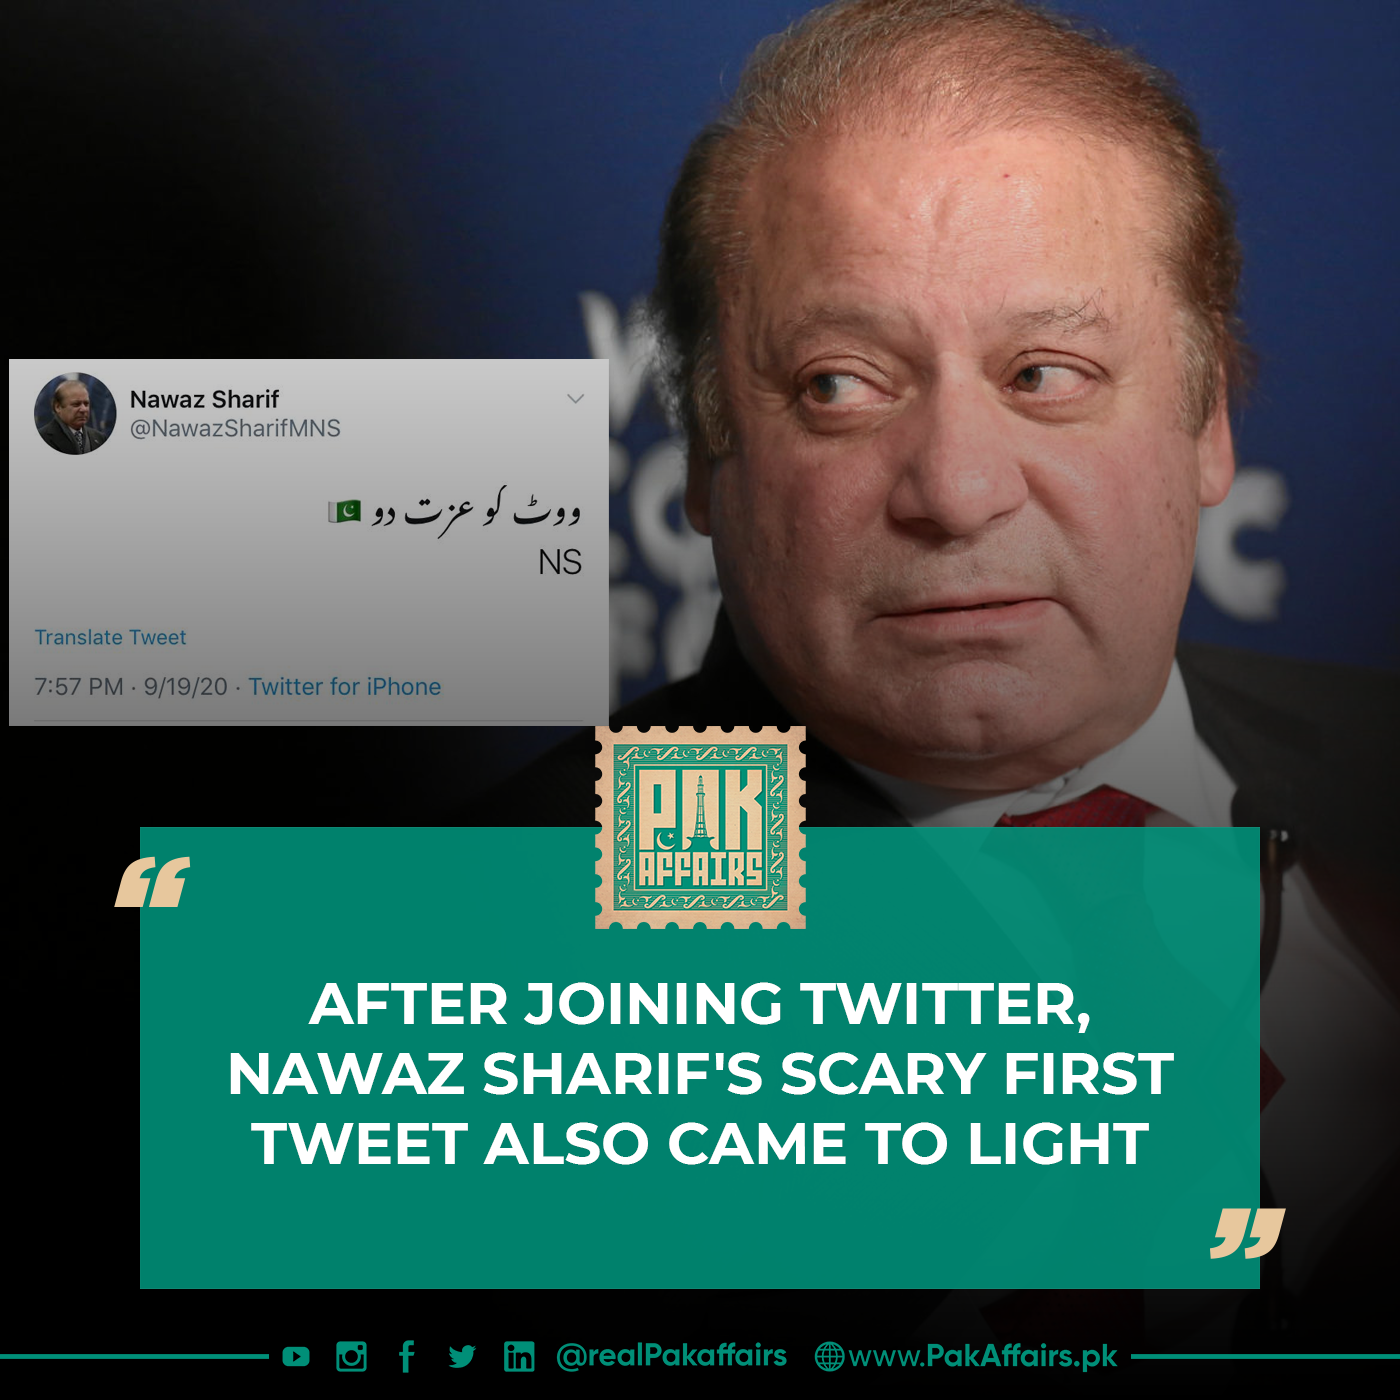 After joining Twitter, Nawaz Sharif's scary first tweet also came to light